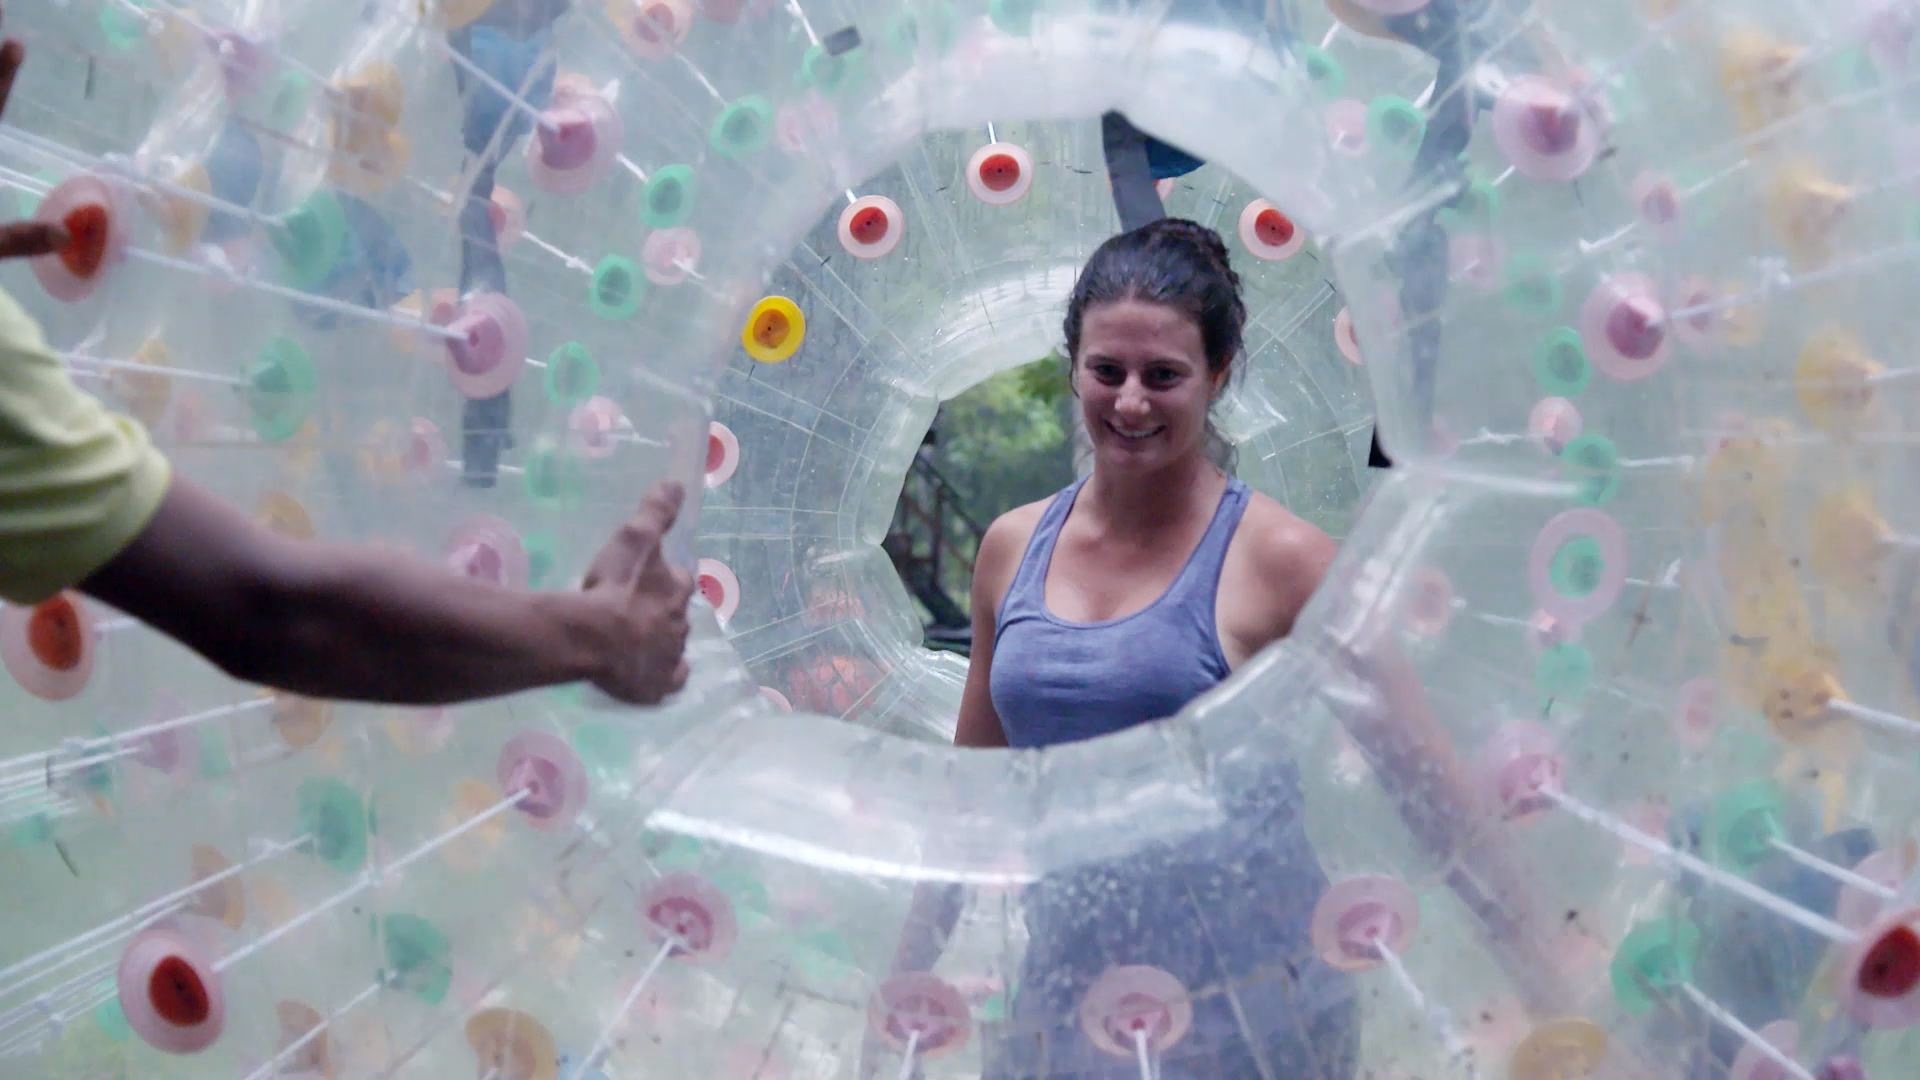 Twins lose it during zorb ball experience